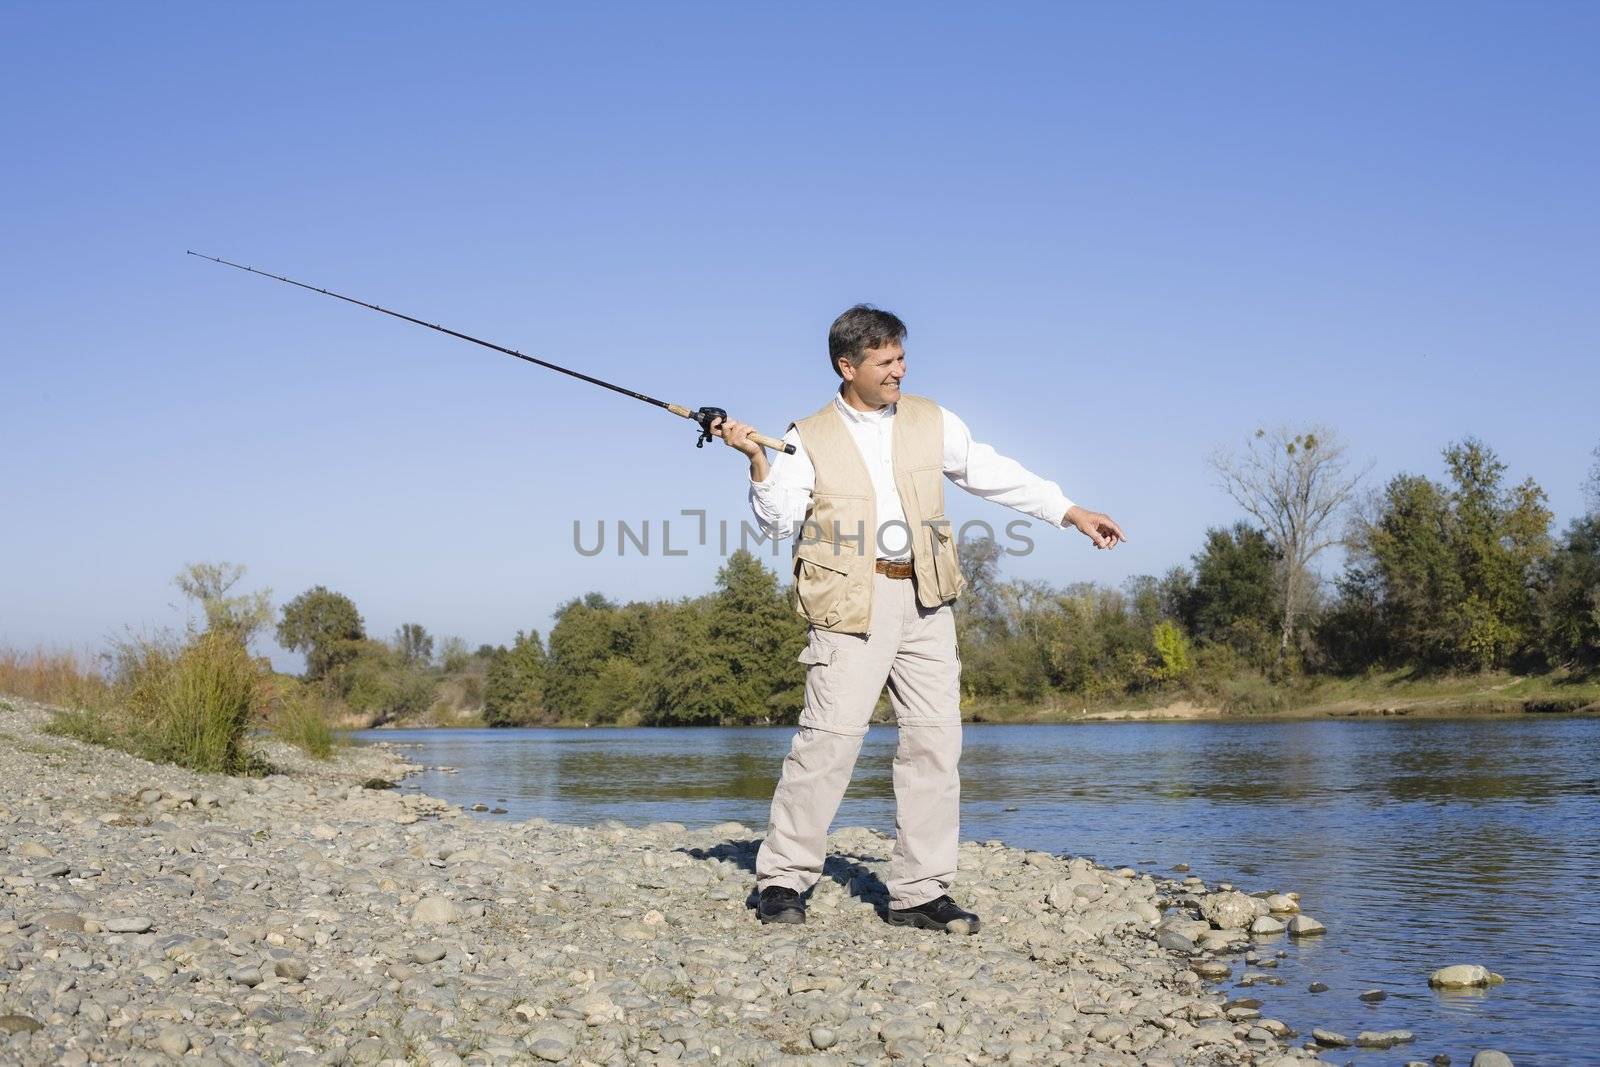 Man Standing By A River With A Fishing Pole